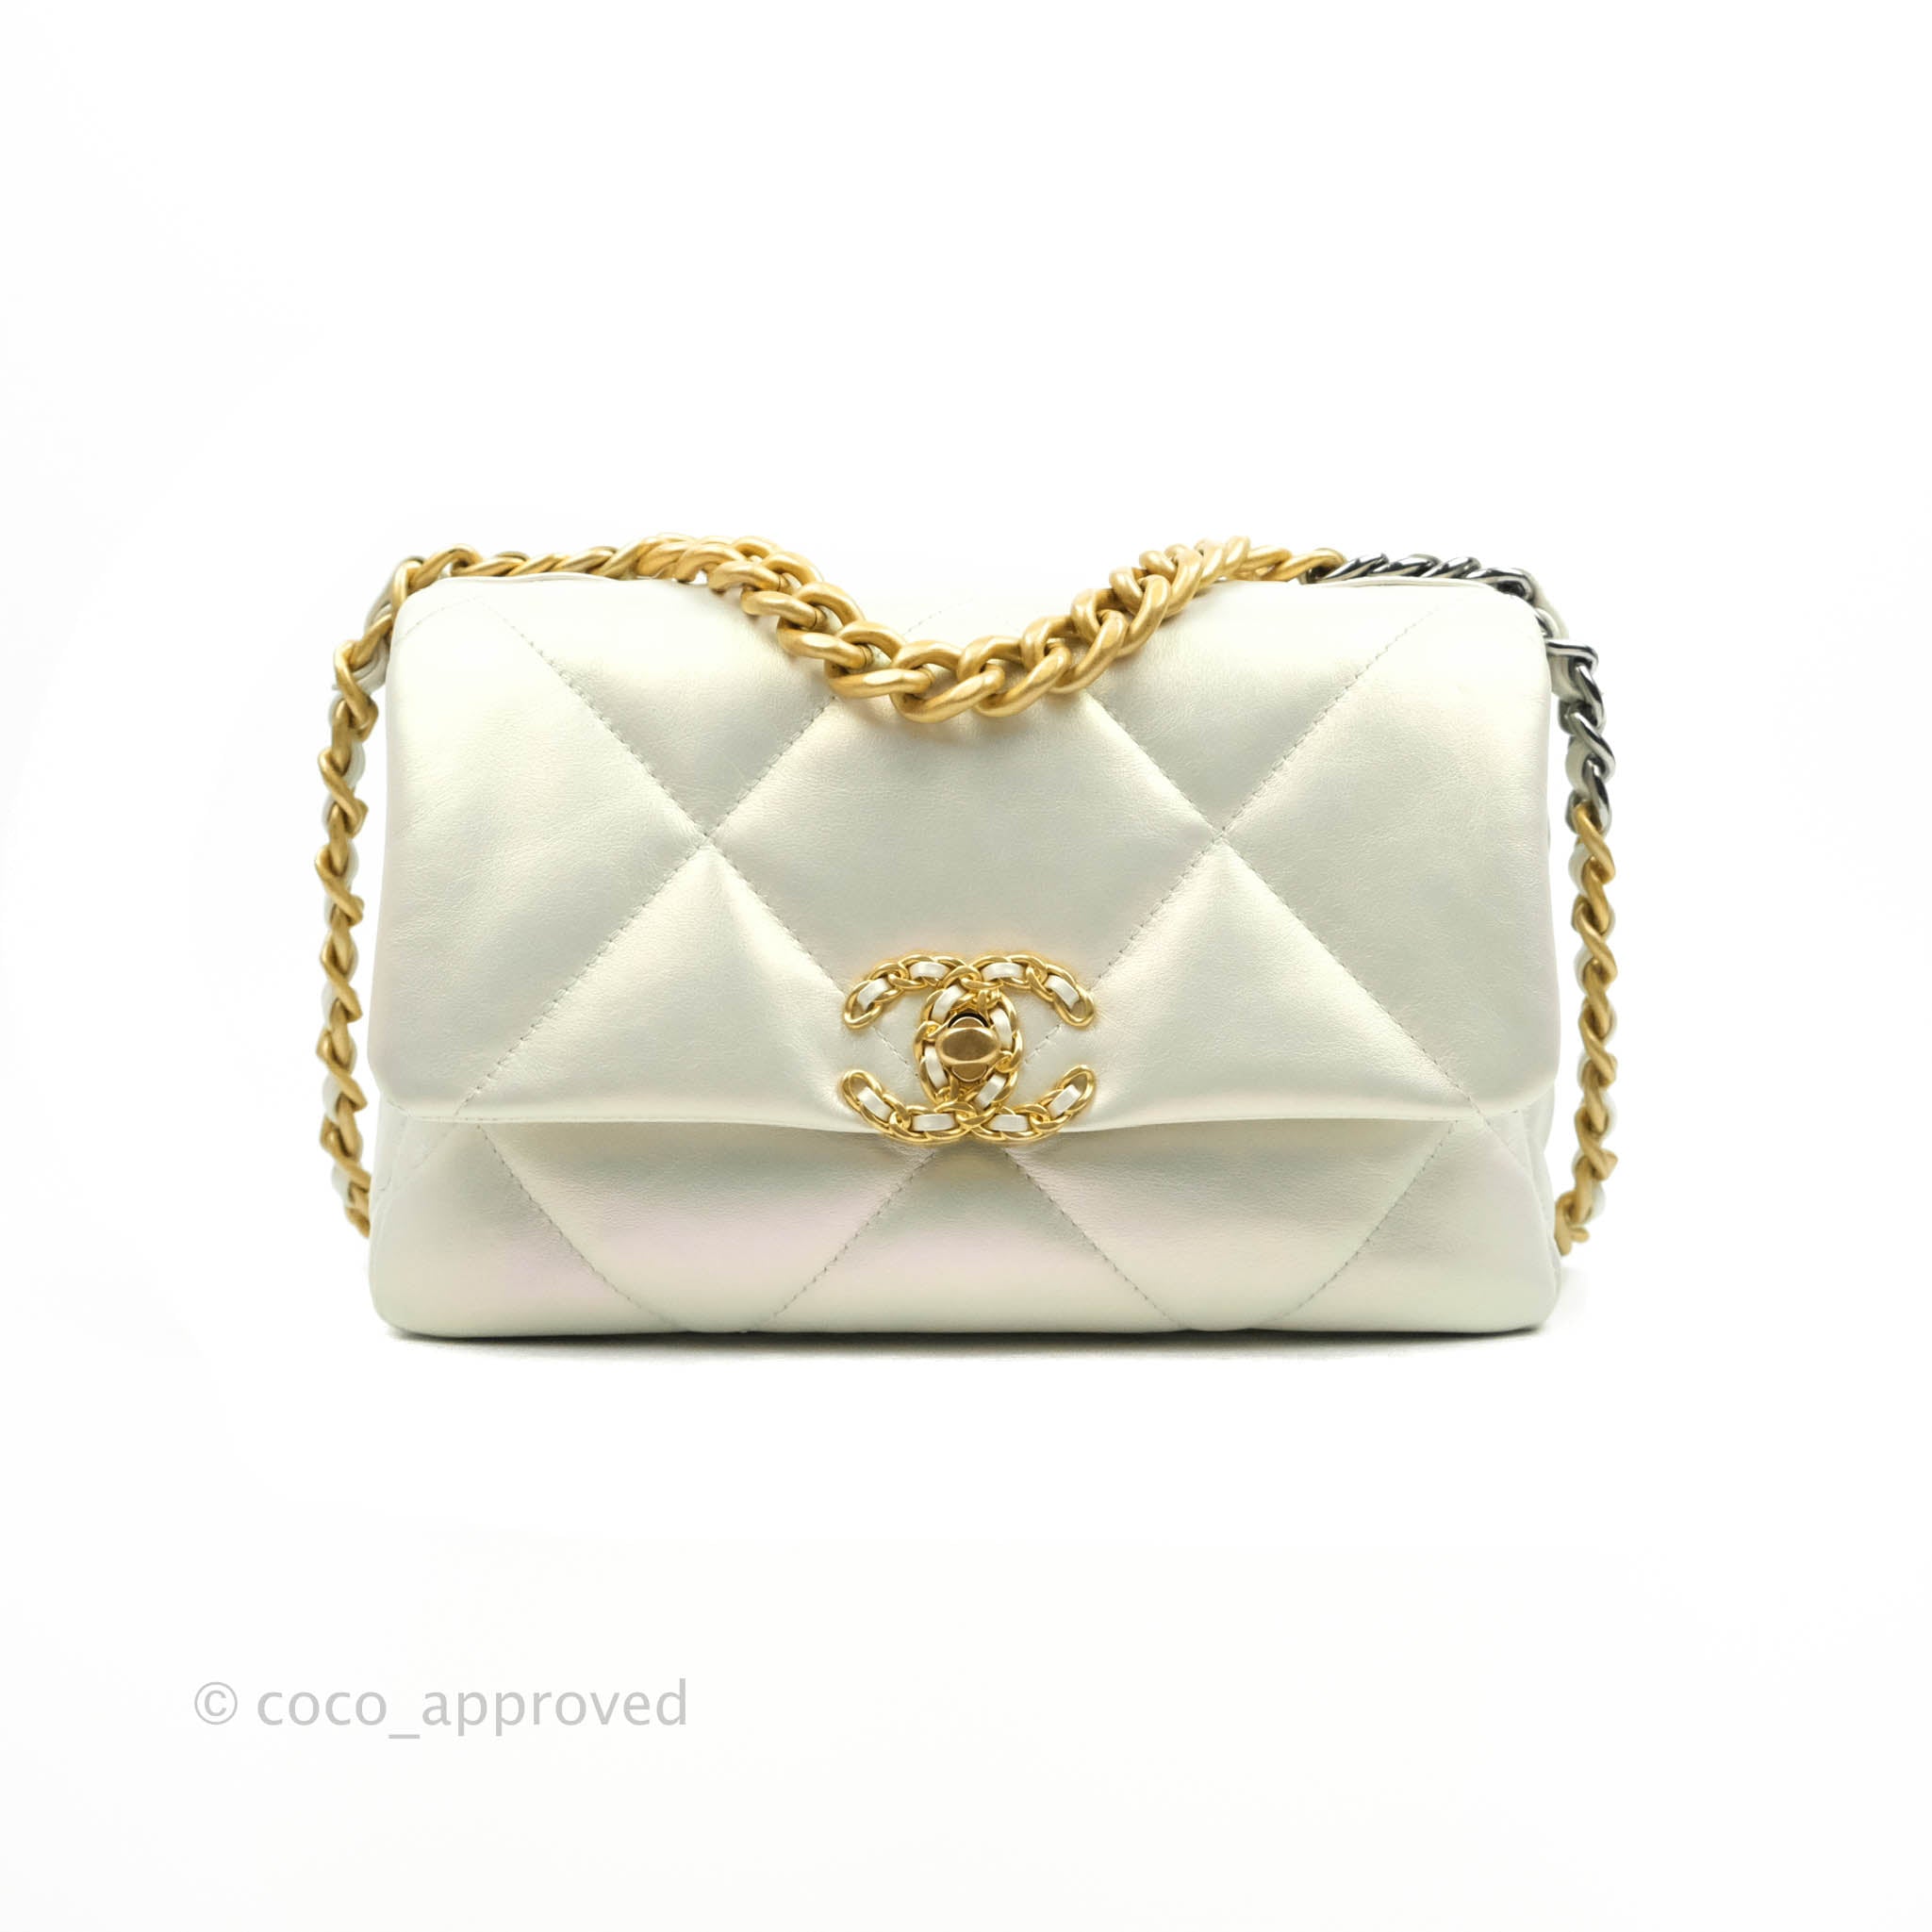 100% Authentic Luxury Goods - Ready Chanel 19 white small ghw #30 #chanel19